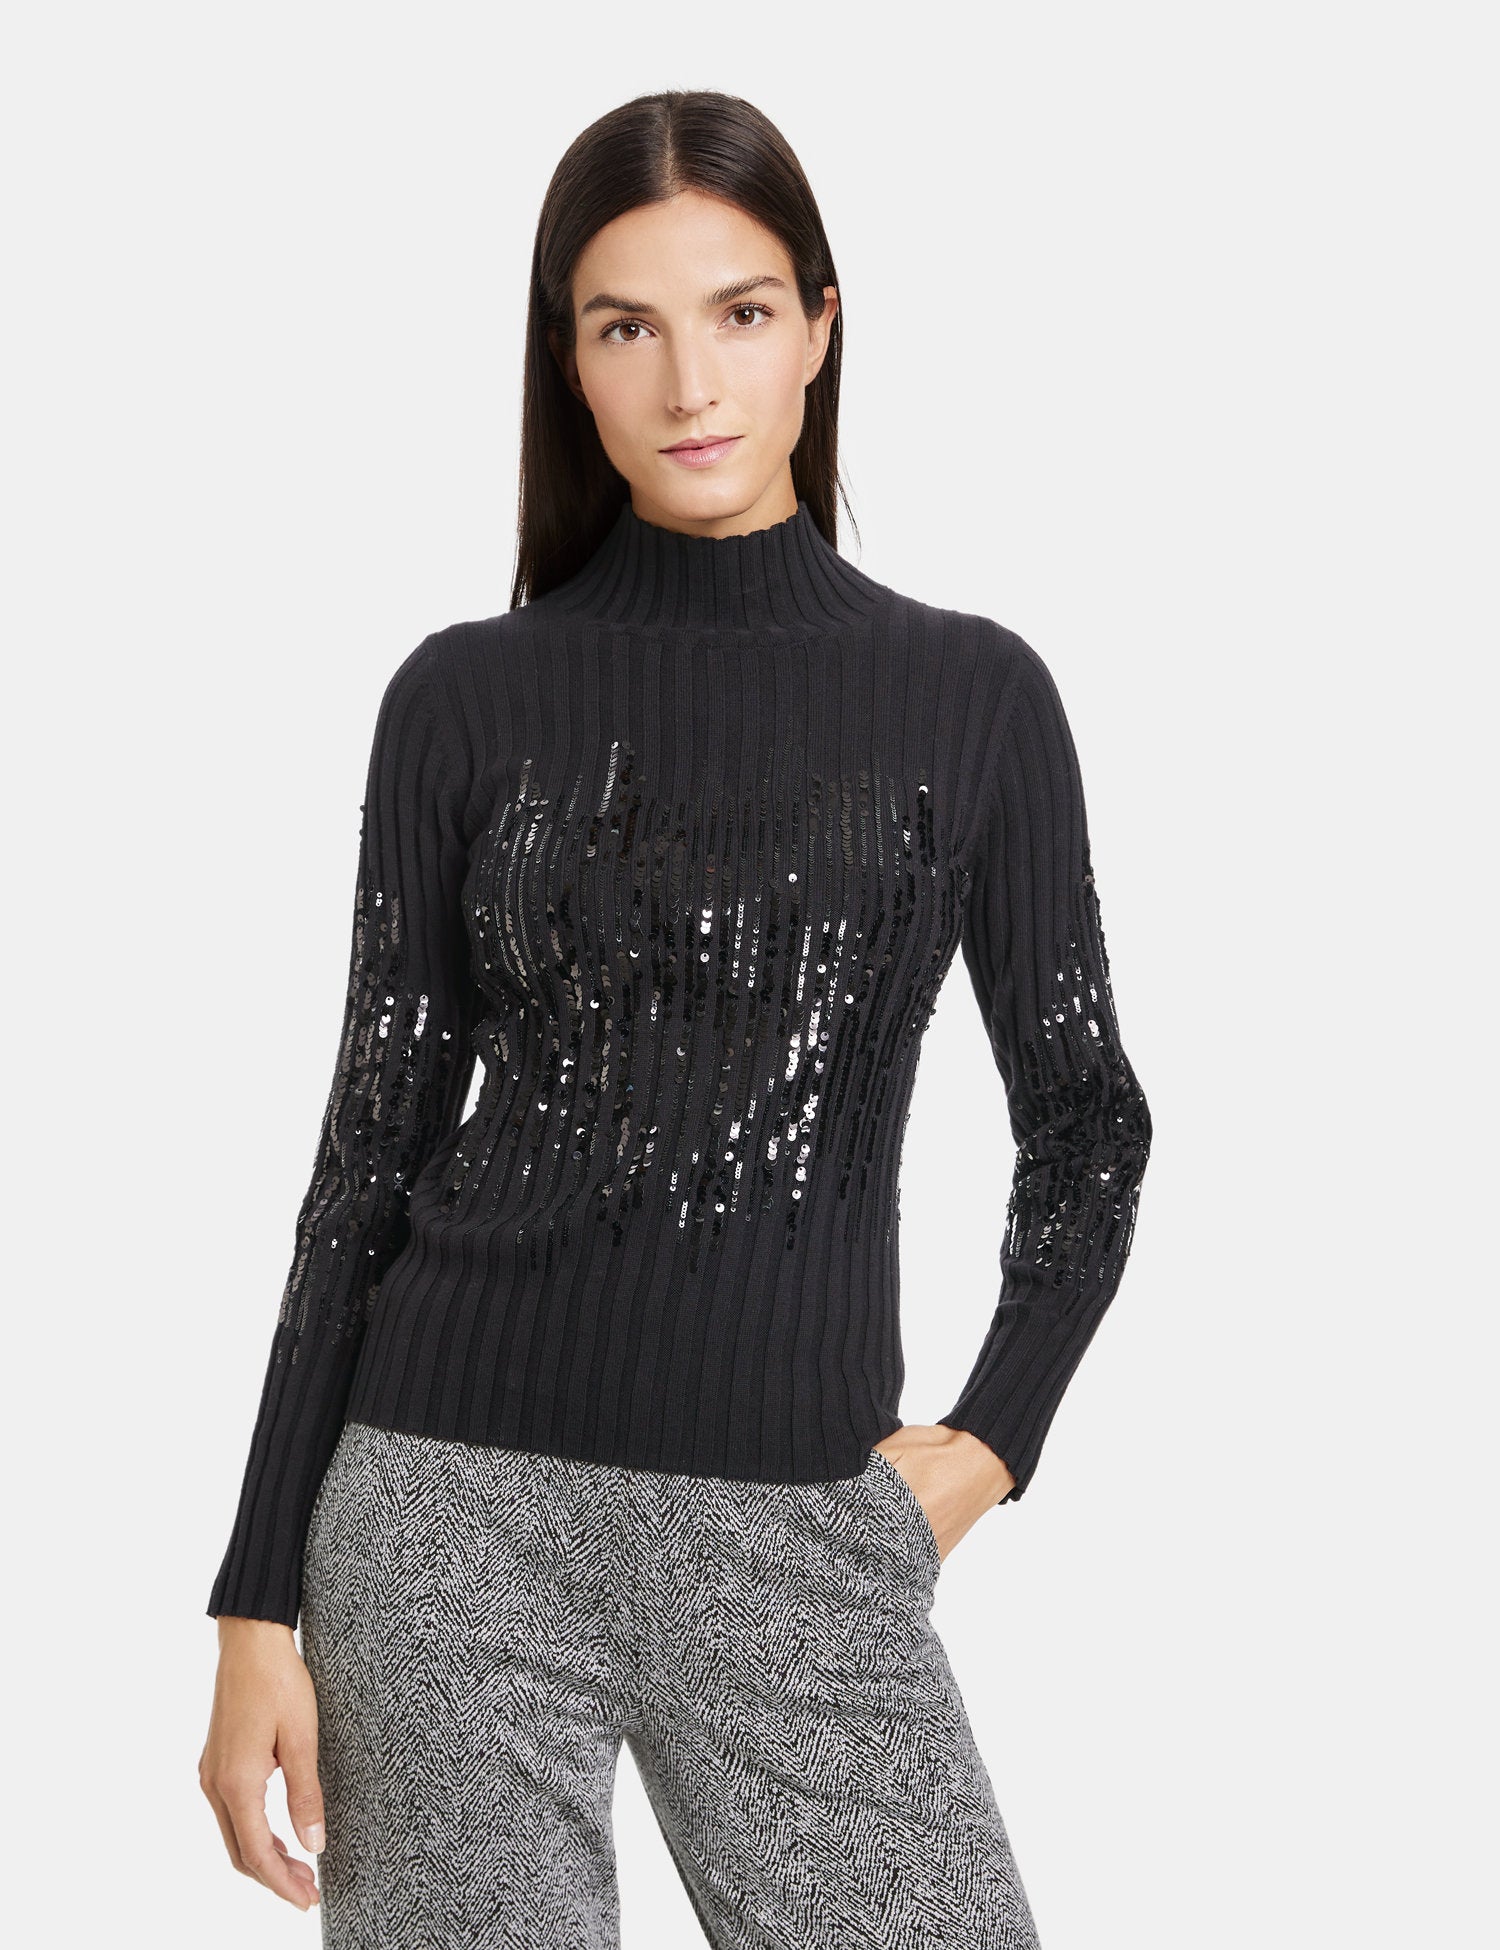 Sweater With A Percentage Of Silk And Sequin Trim_170566-44740_11000_03